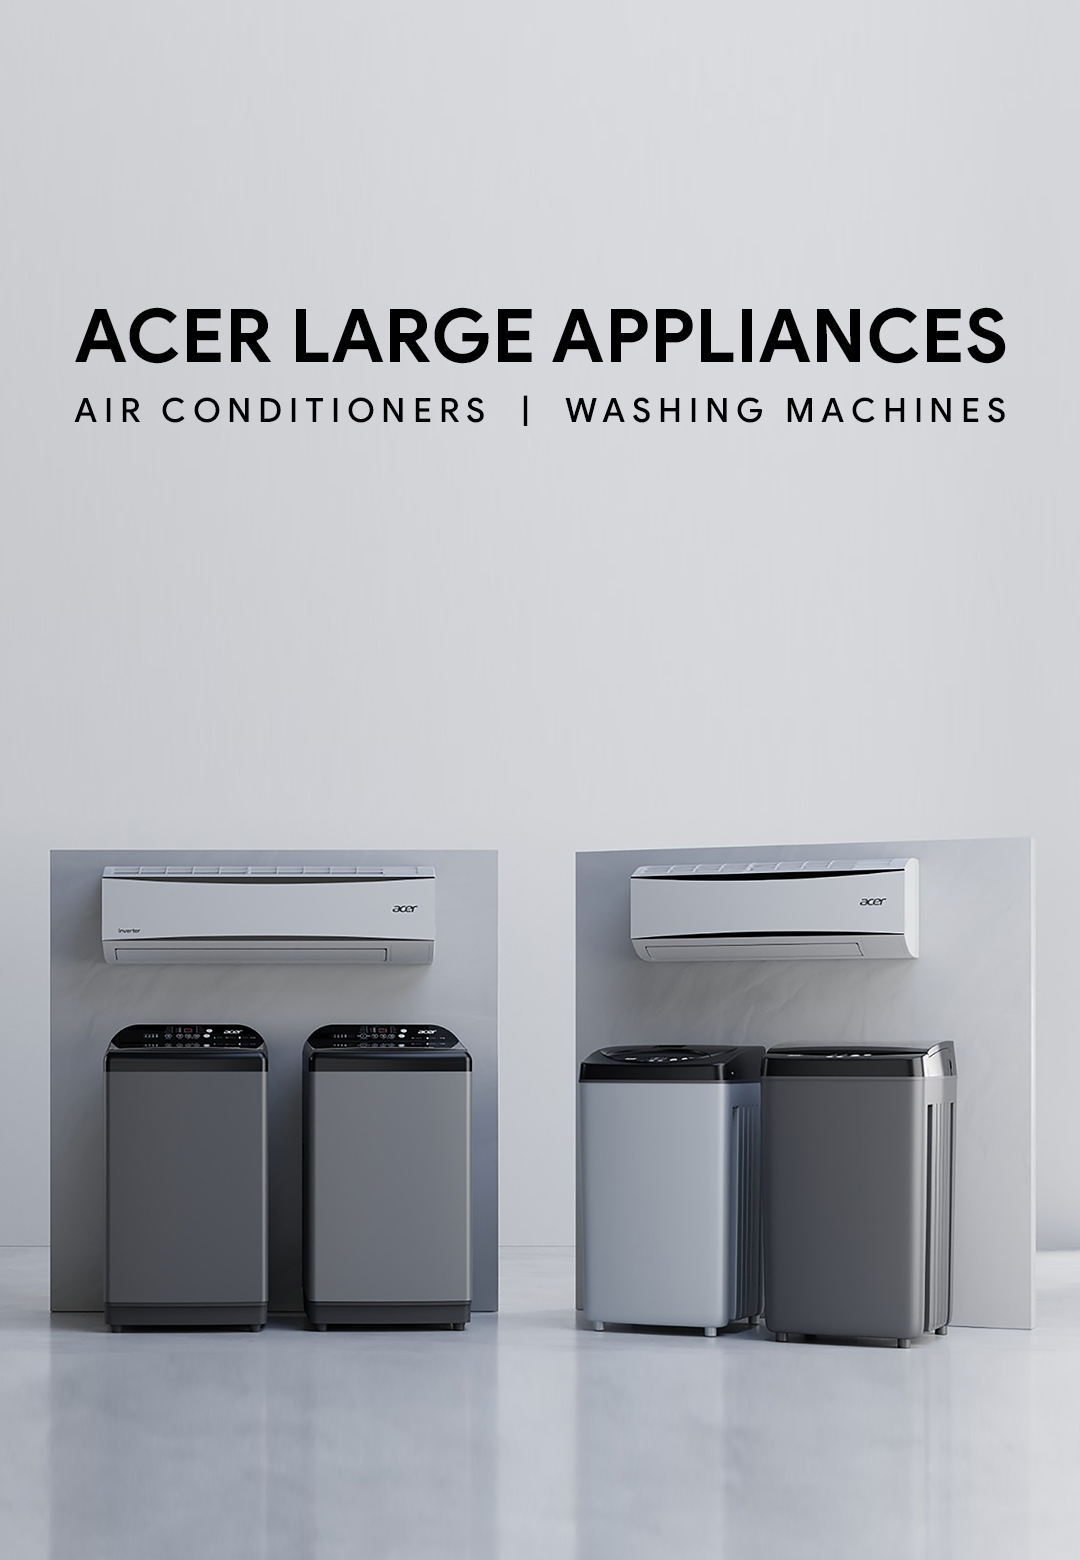 Buy Acer Fully Automatic Washing Machines Online | Indkal Technologies | Acer Appliances